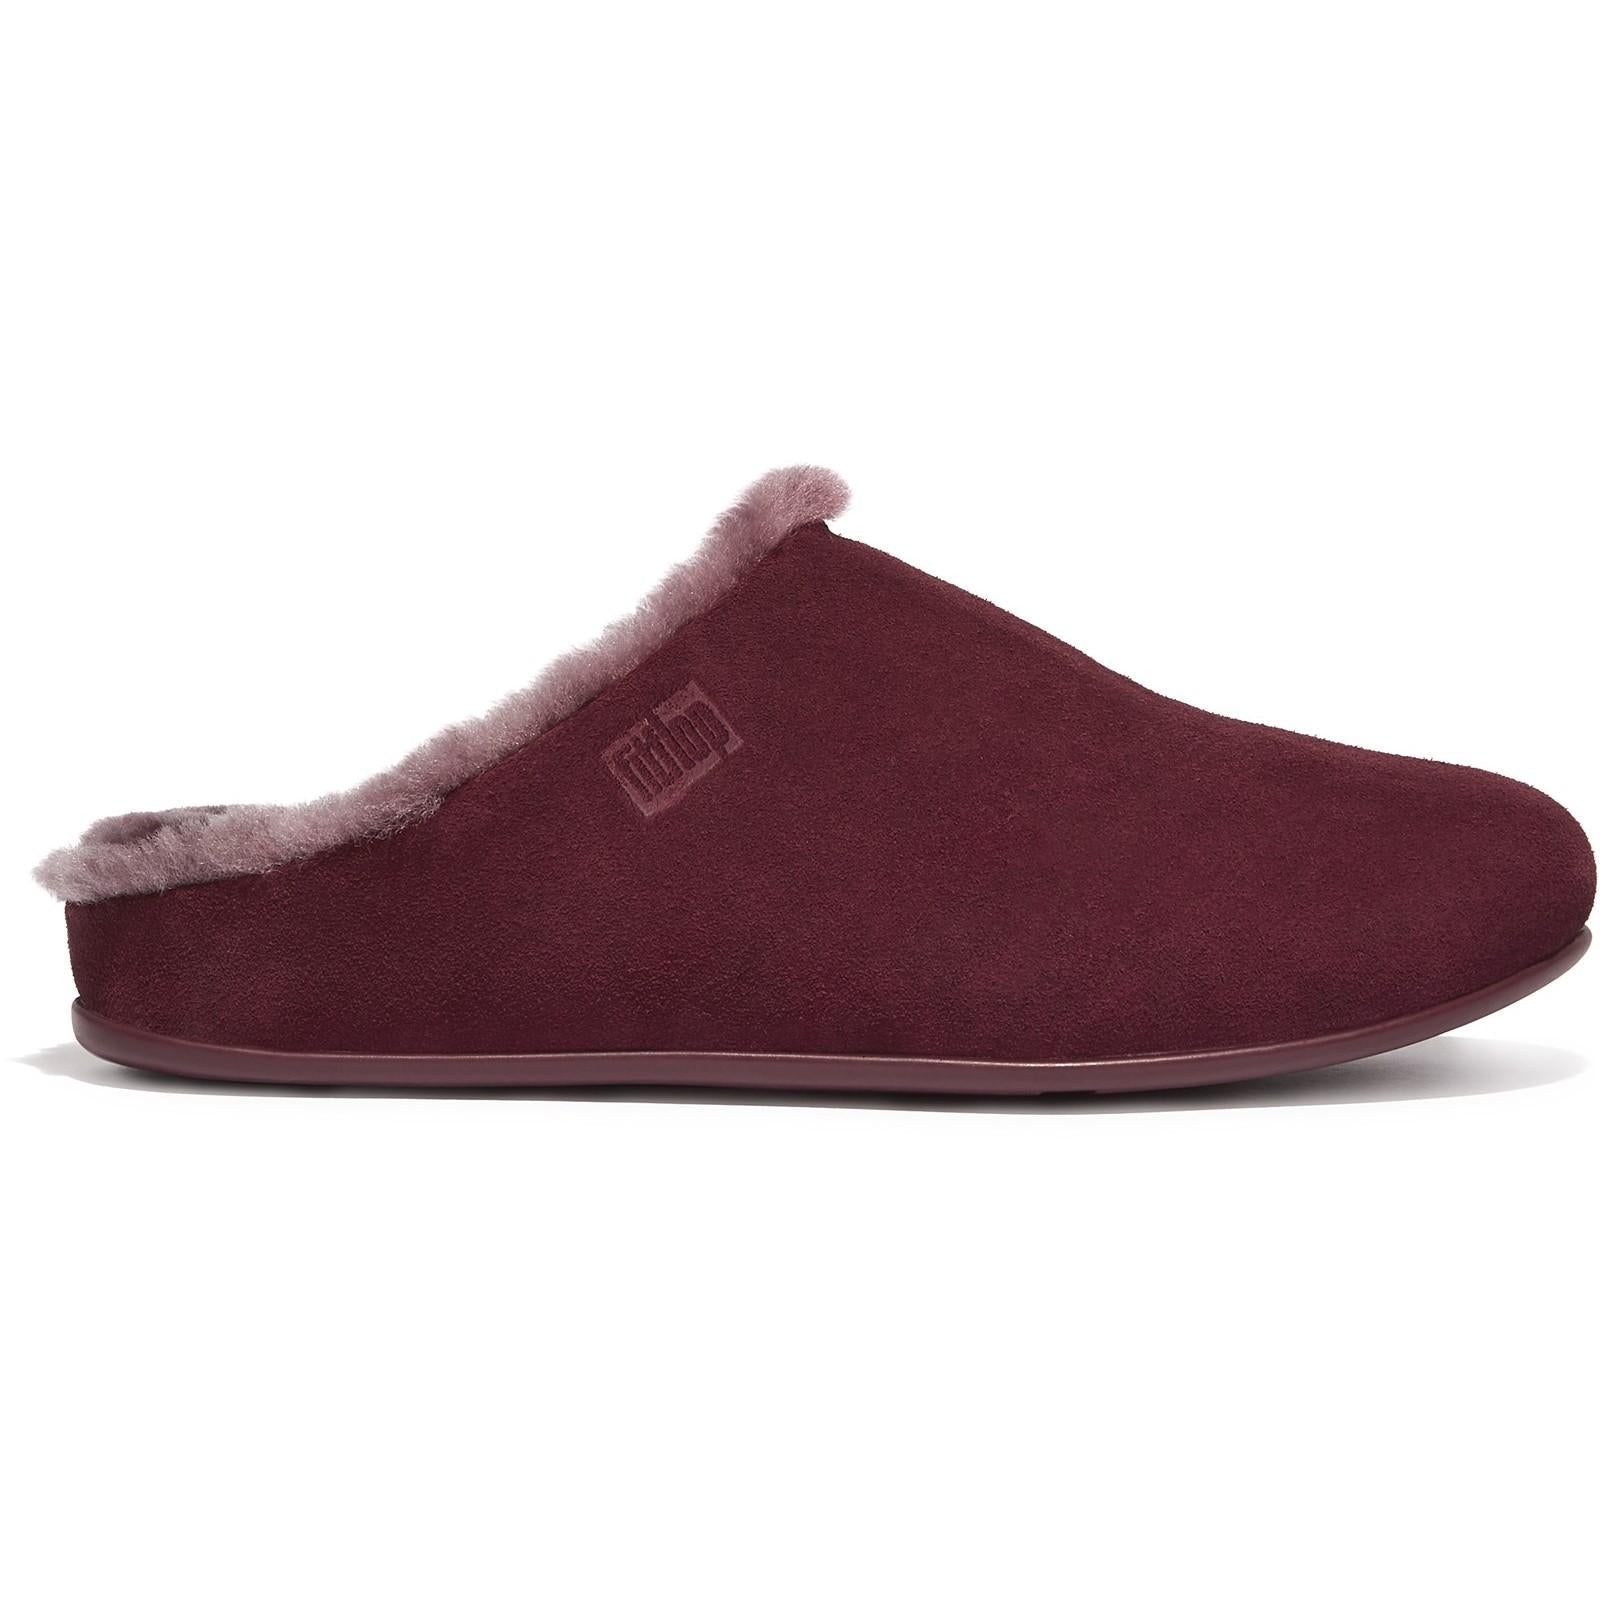 Fitflop Chrissie Shearling-Lined Suede Slippers